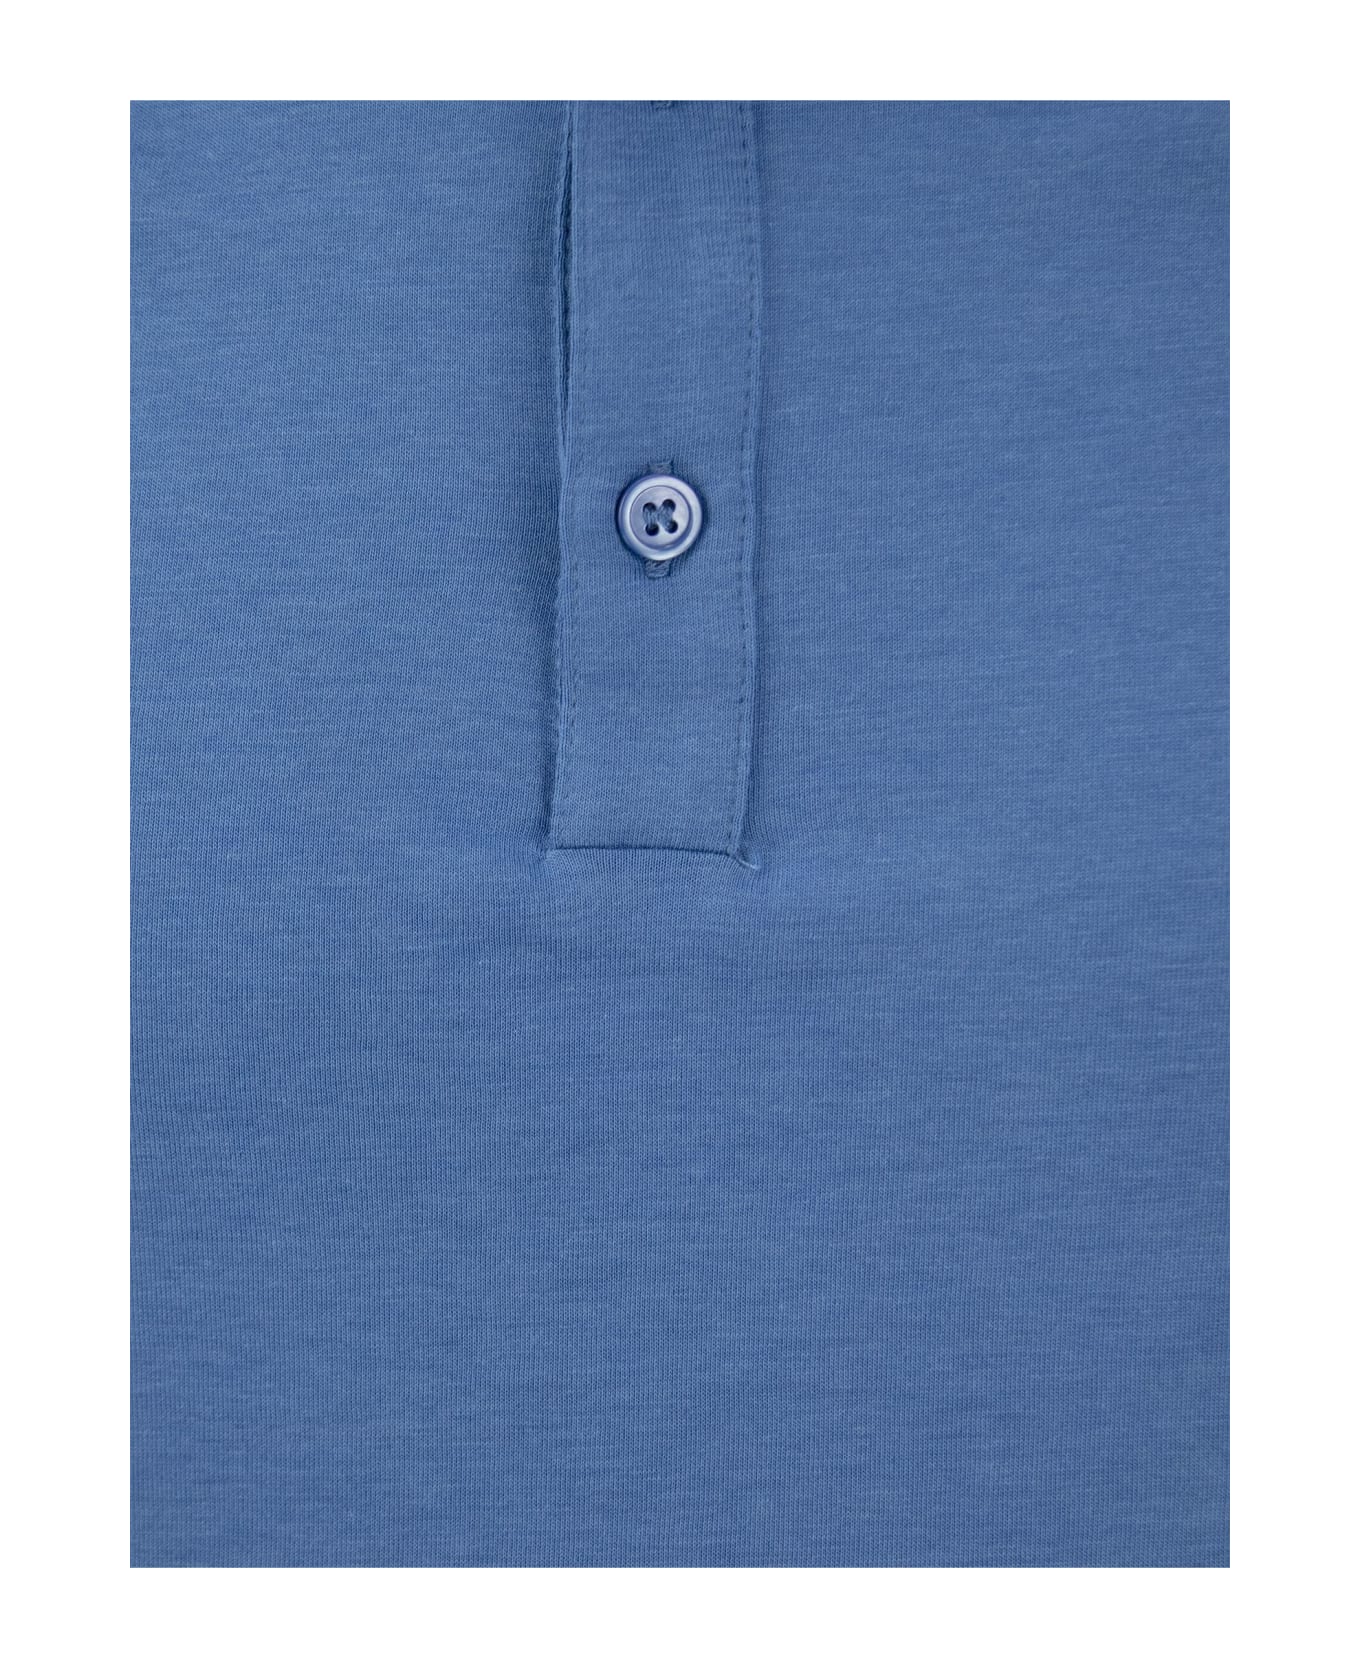 Majestic Filatures Short-sleeved Polo Shirt In Lyocell And Cotton - Light Blue ポロシャツ